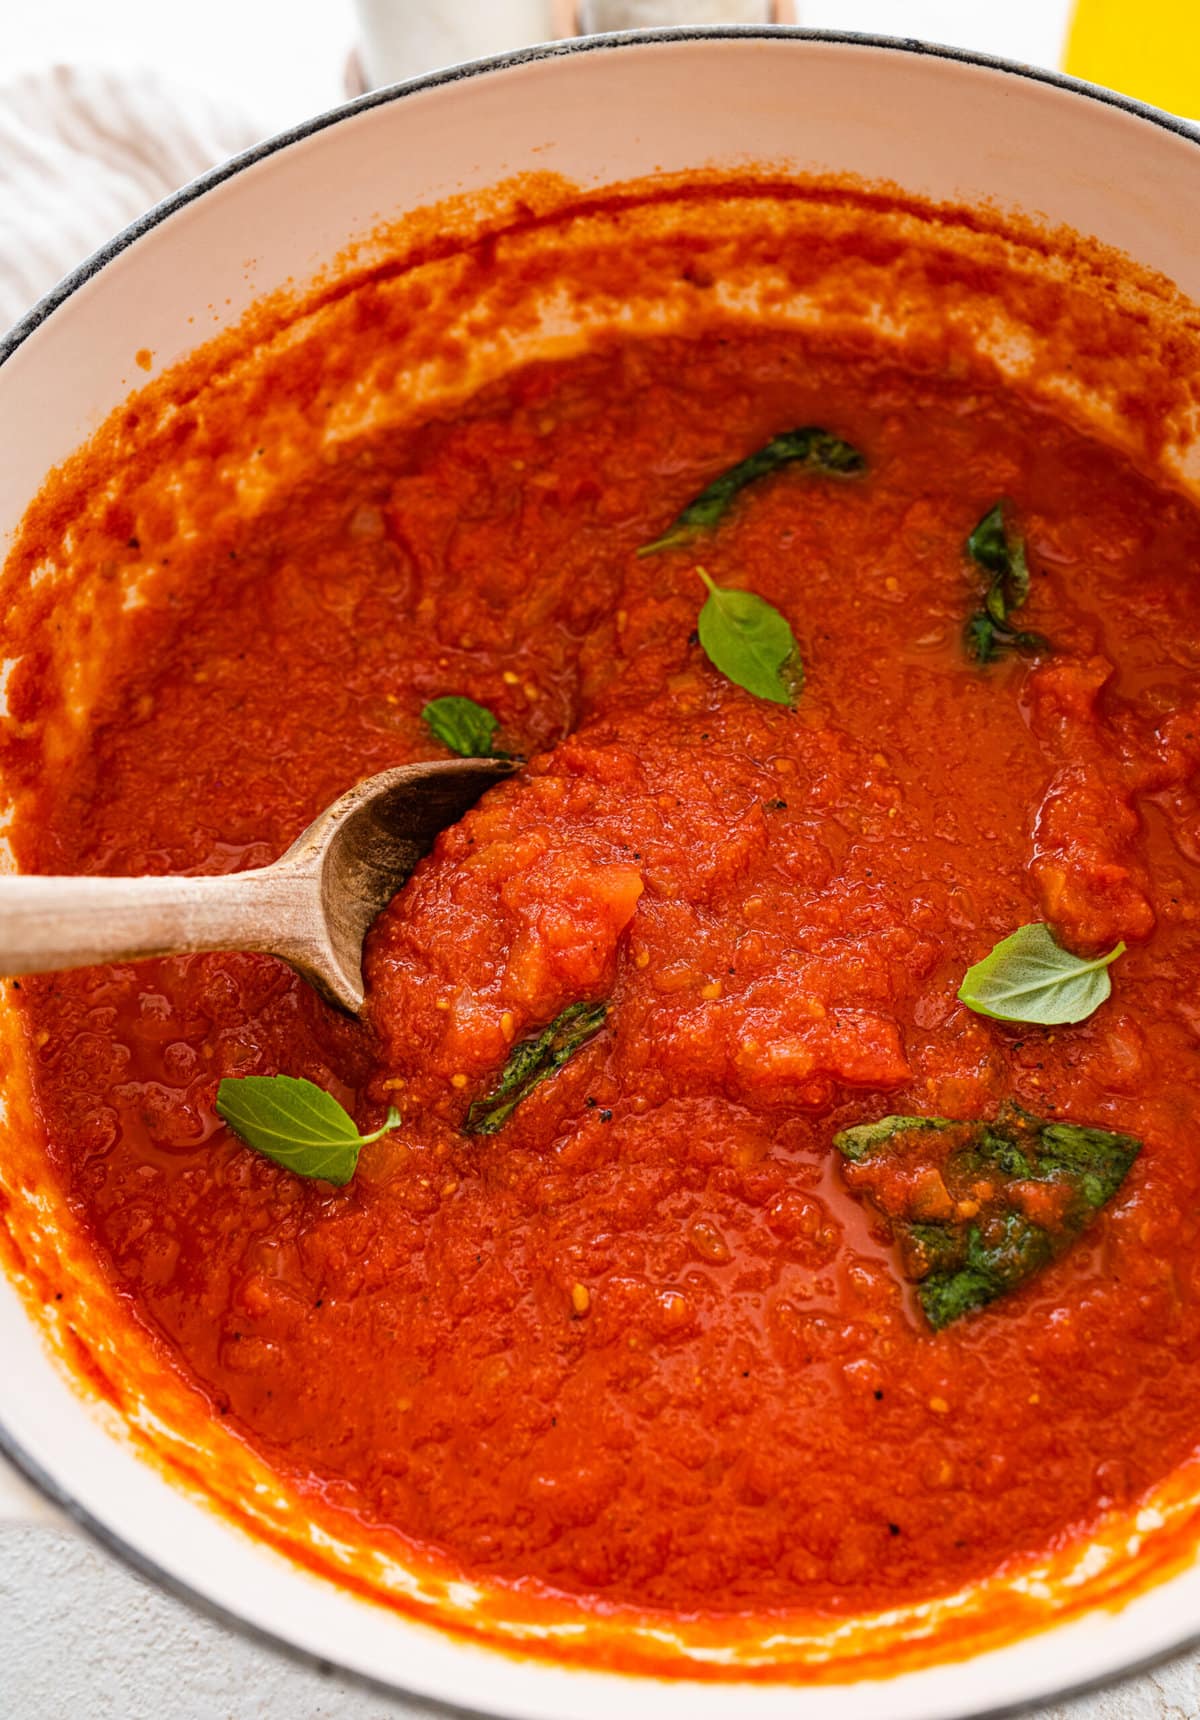 wooden spoon inside the pot of Italian tomato sauce and stirring.